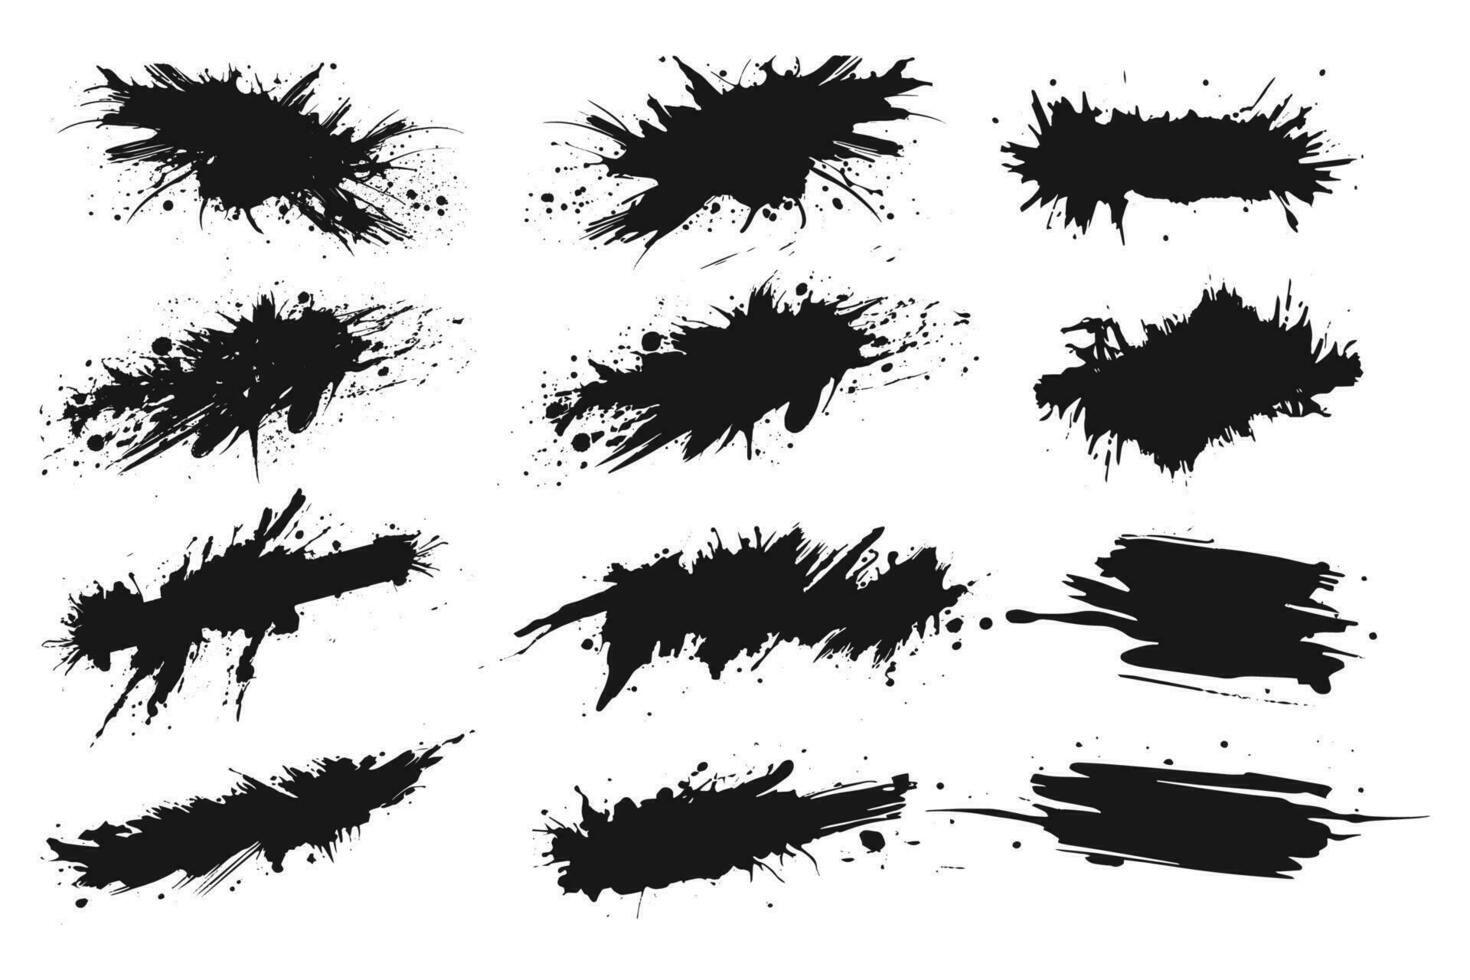 Paint ink Brush Stroke Grunge Texture Collection. Hand drawings grunge ink splatters collection of different graphic elements. vector